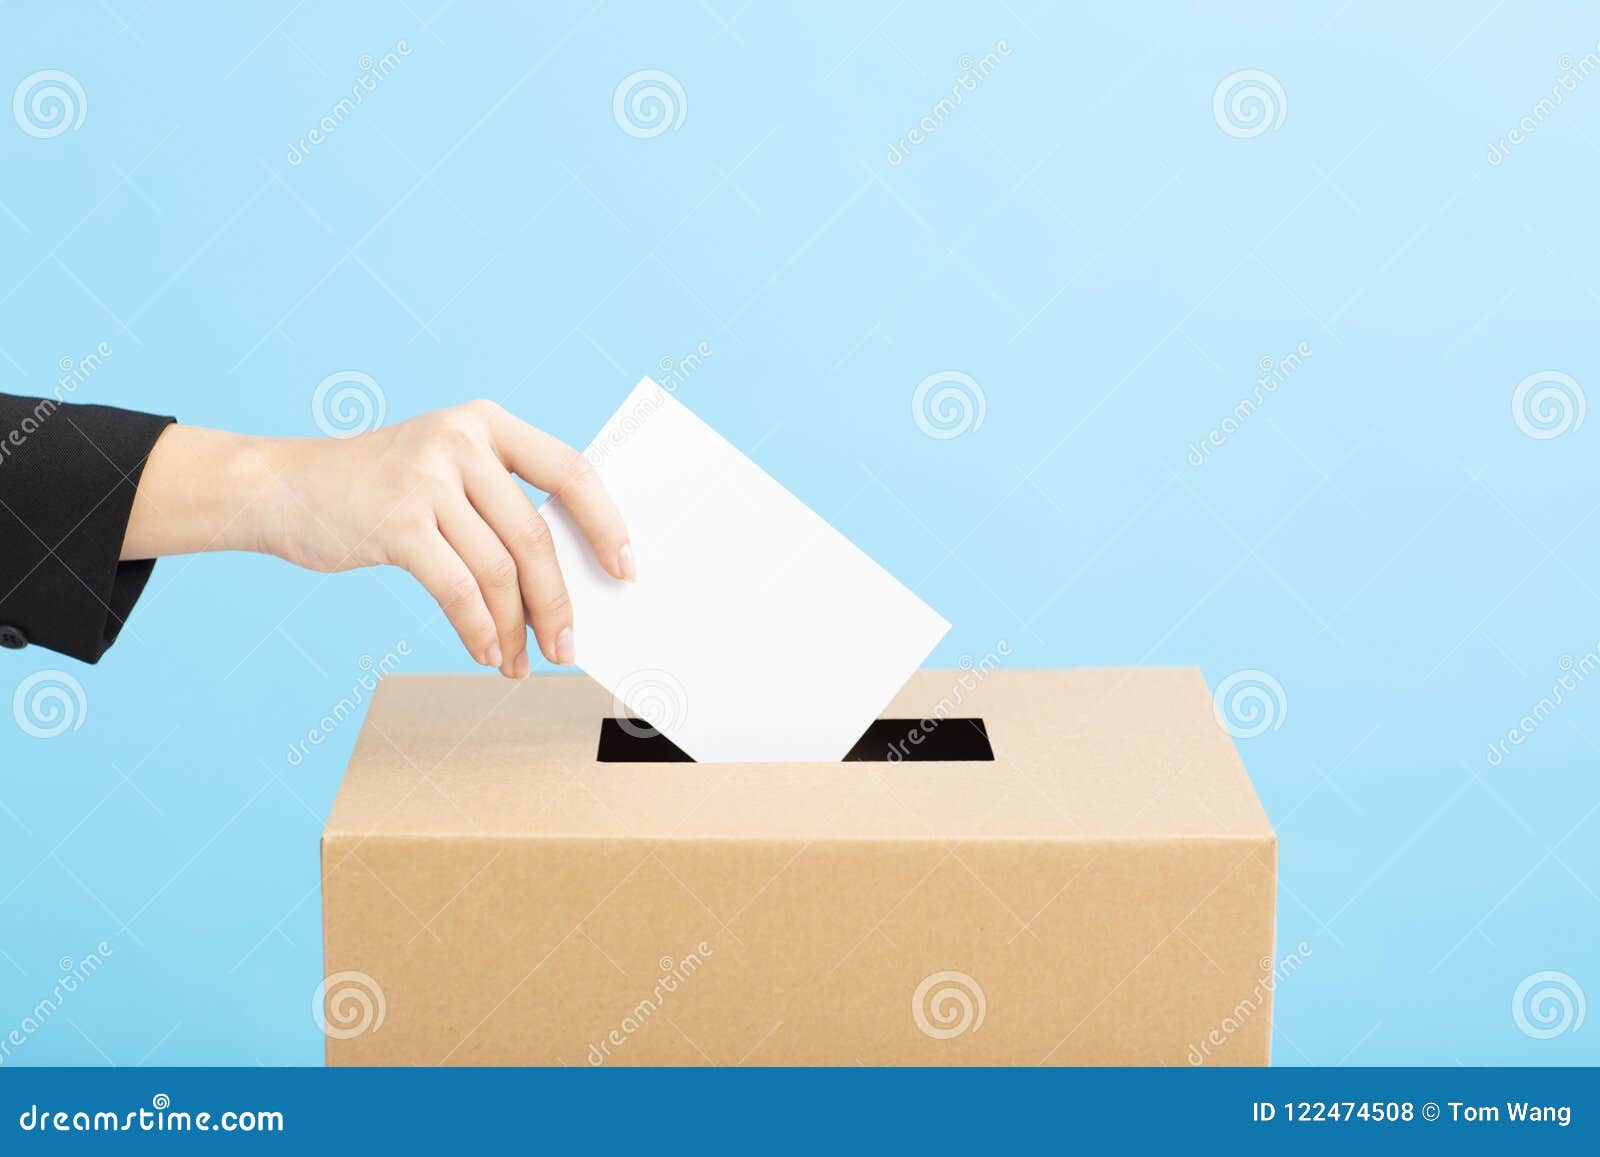 ballot box with person casting vote on blank voting slip